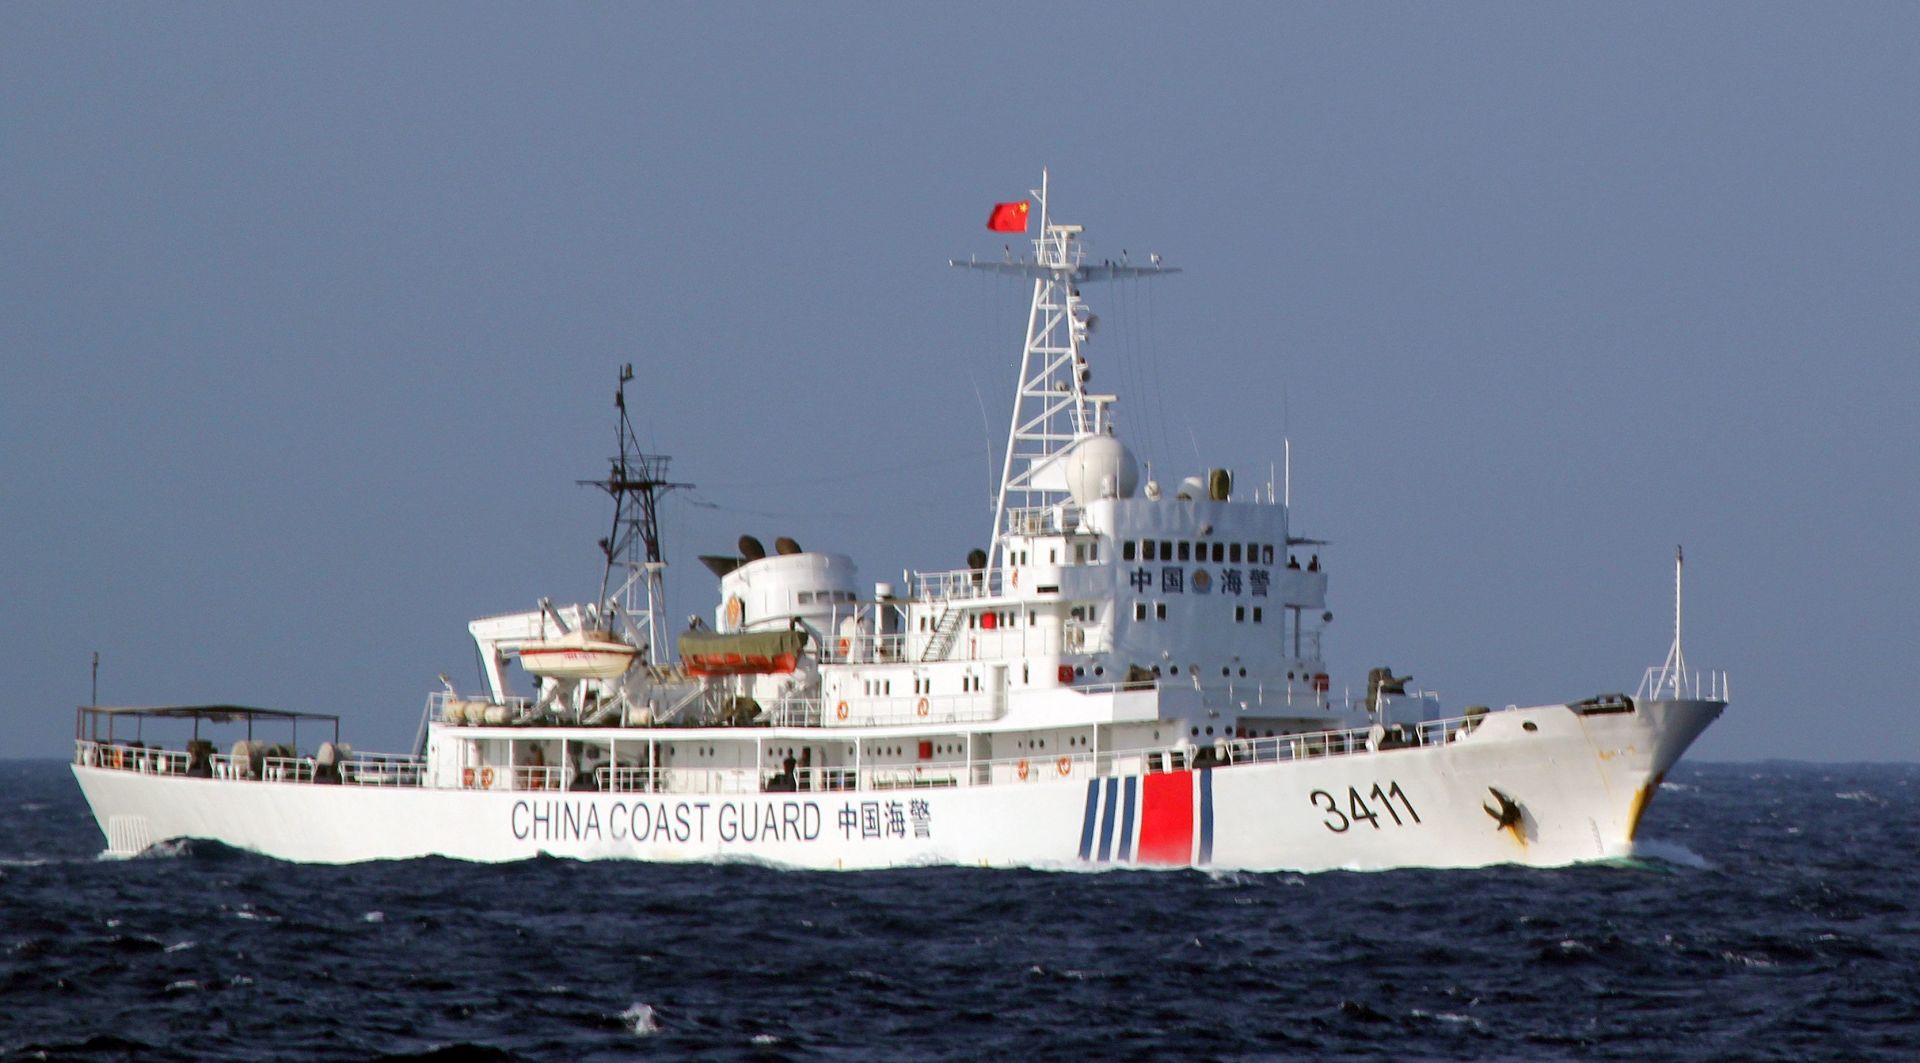 epa05421558 (FILE) A file photo dated 14 May 2014 of a Chinese coast guard vessel near the area of China's oil drilling rig in disputed waters in the South China Sea, off shore Vietnam. The tribunal at the Permanent Court of Arbitration (PCA) in The Hague has ruled on 12 July 2016 against Chinese claims to rights in South China Sea, declaring that a 'nine-dash' line the Chinese government used to delineate South China Sea claims contravenes a United Nations convention on maritime law. The PCA said there was no evidence that China had historically exercised exclusive control over the waters or resources.  EPA/STR